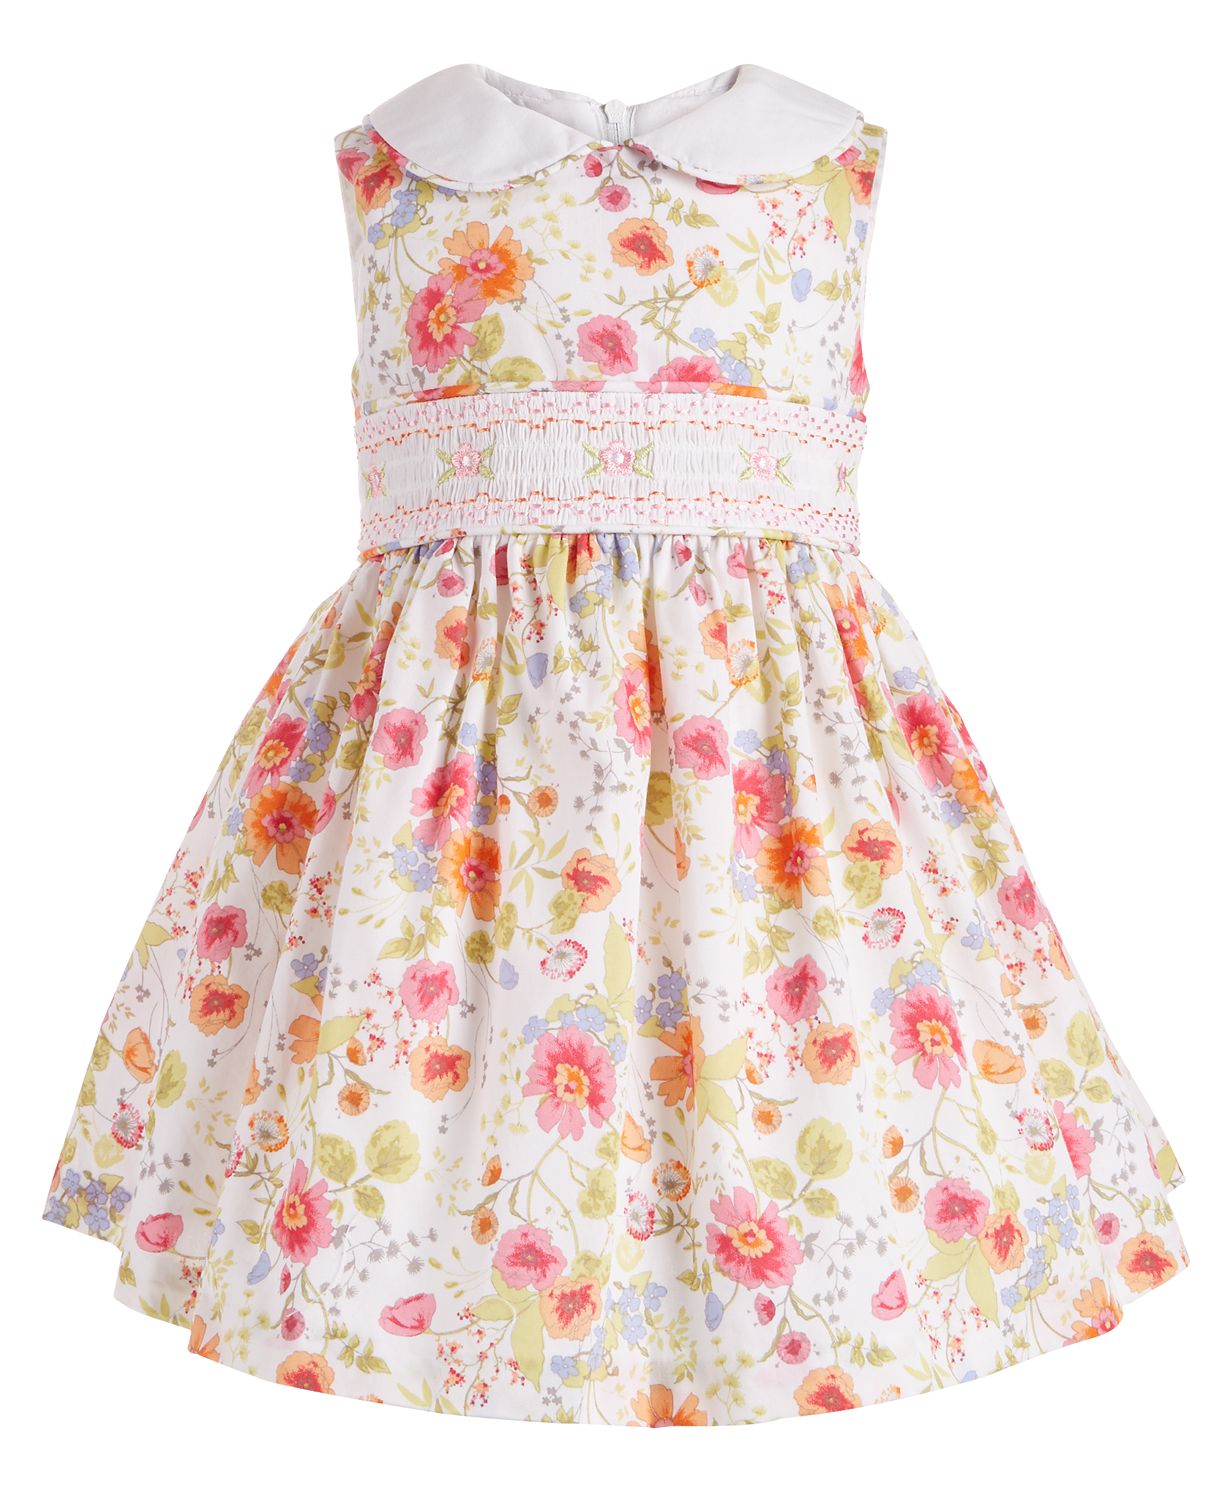 Cute Baby Girl Summer Dresses For Everyday Wear Or Special Occasions ...